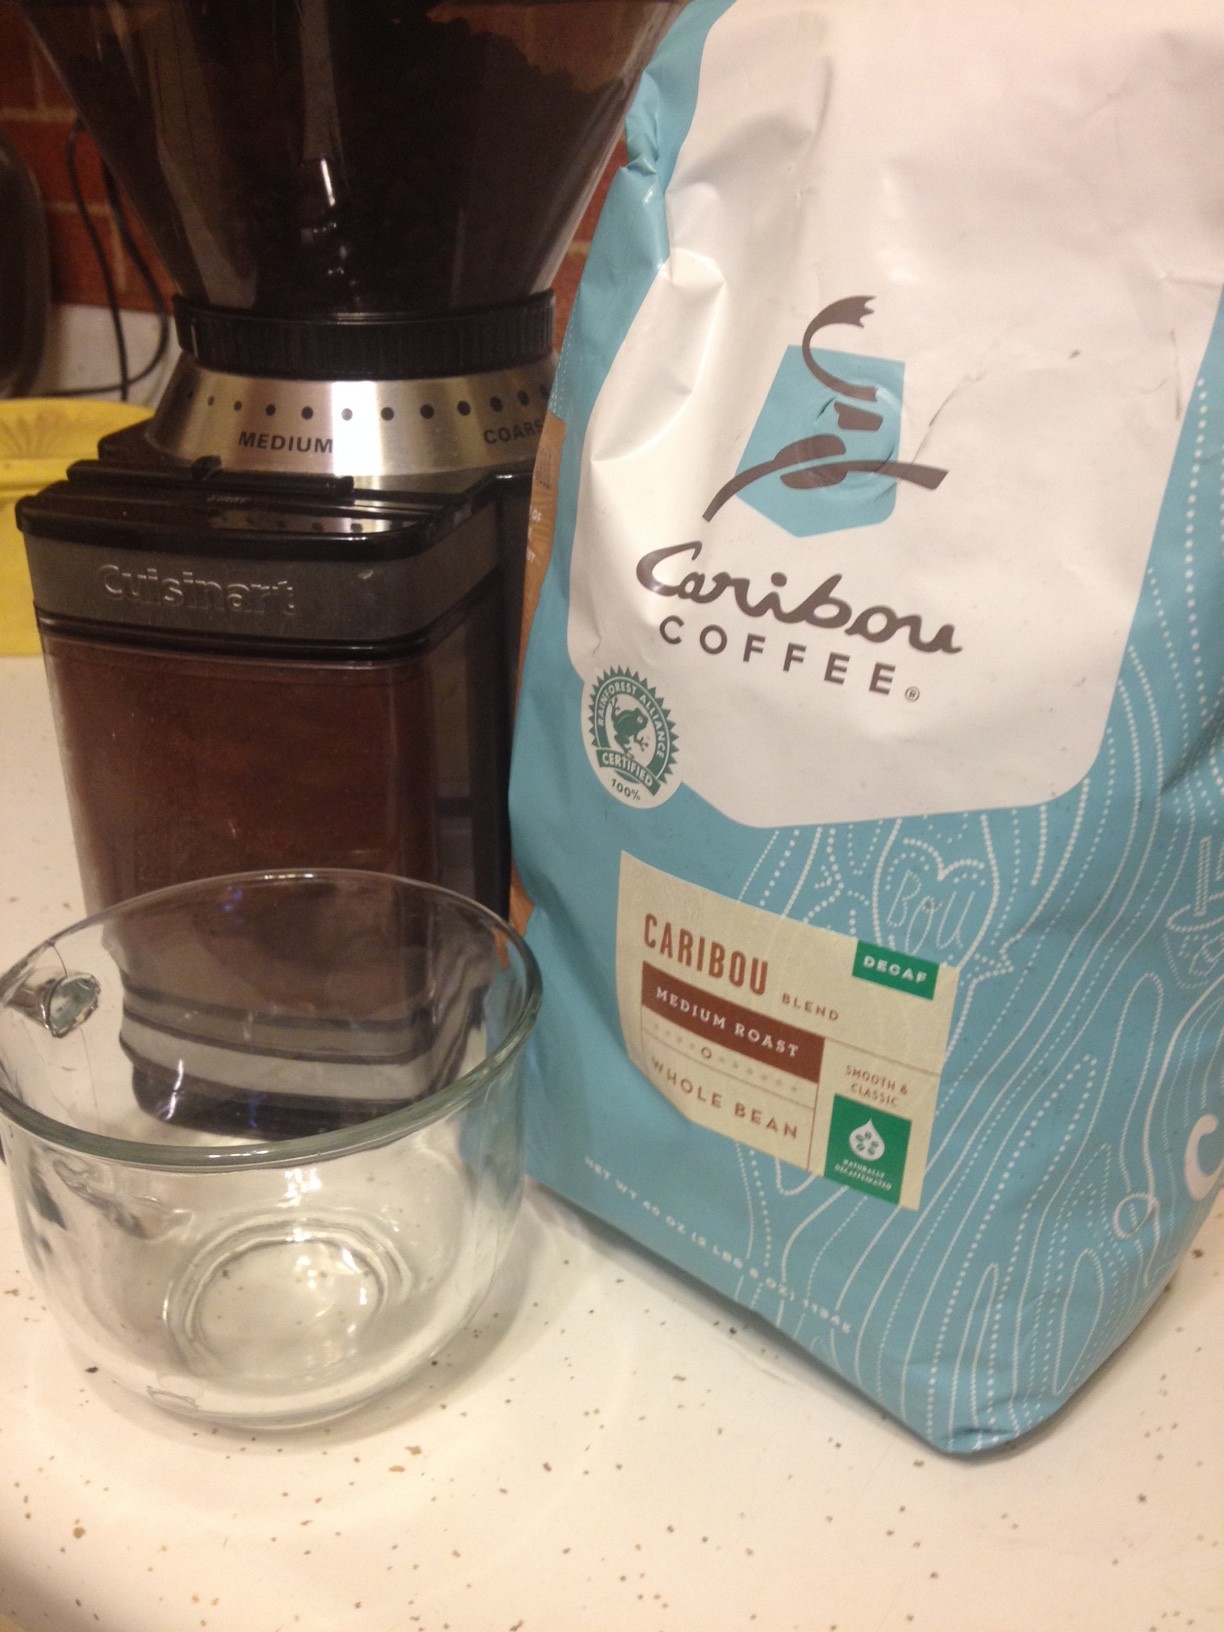 Photo showing Caribou decaf whole bean coffee